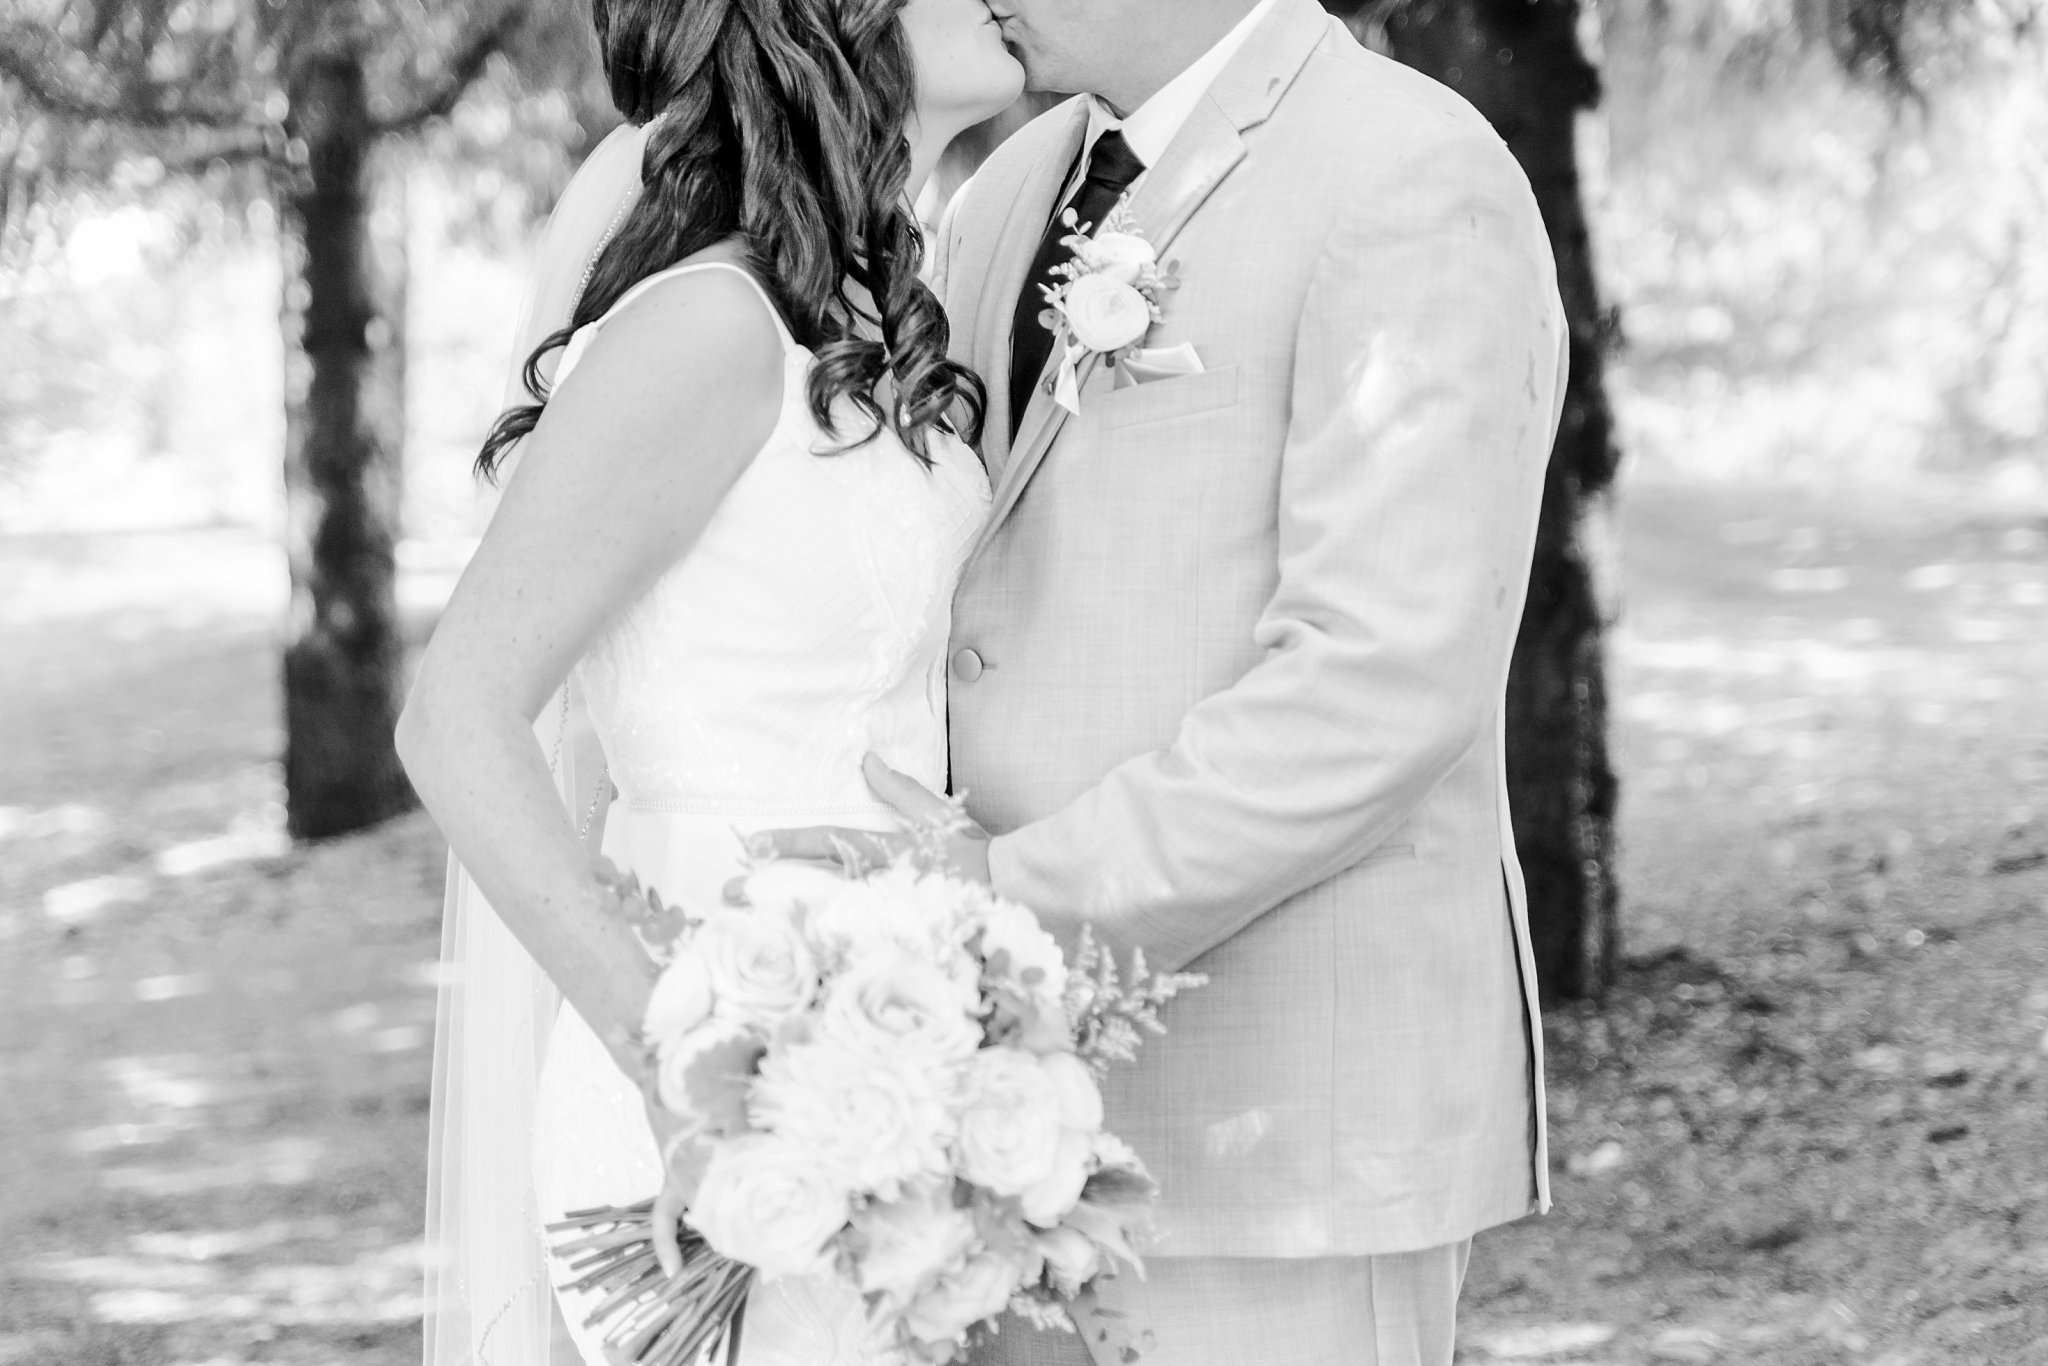 a black and white photo of a bride and groom kissing. their heads are cut off at the top. the bride is holding a bouquet.